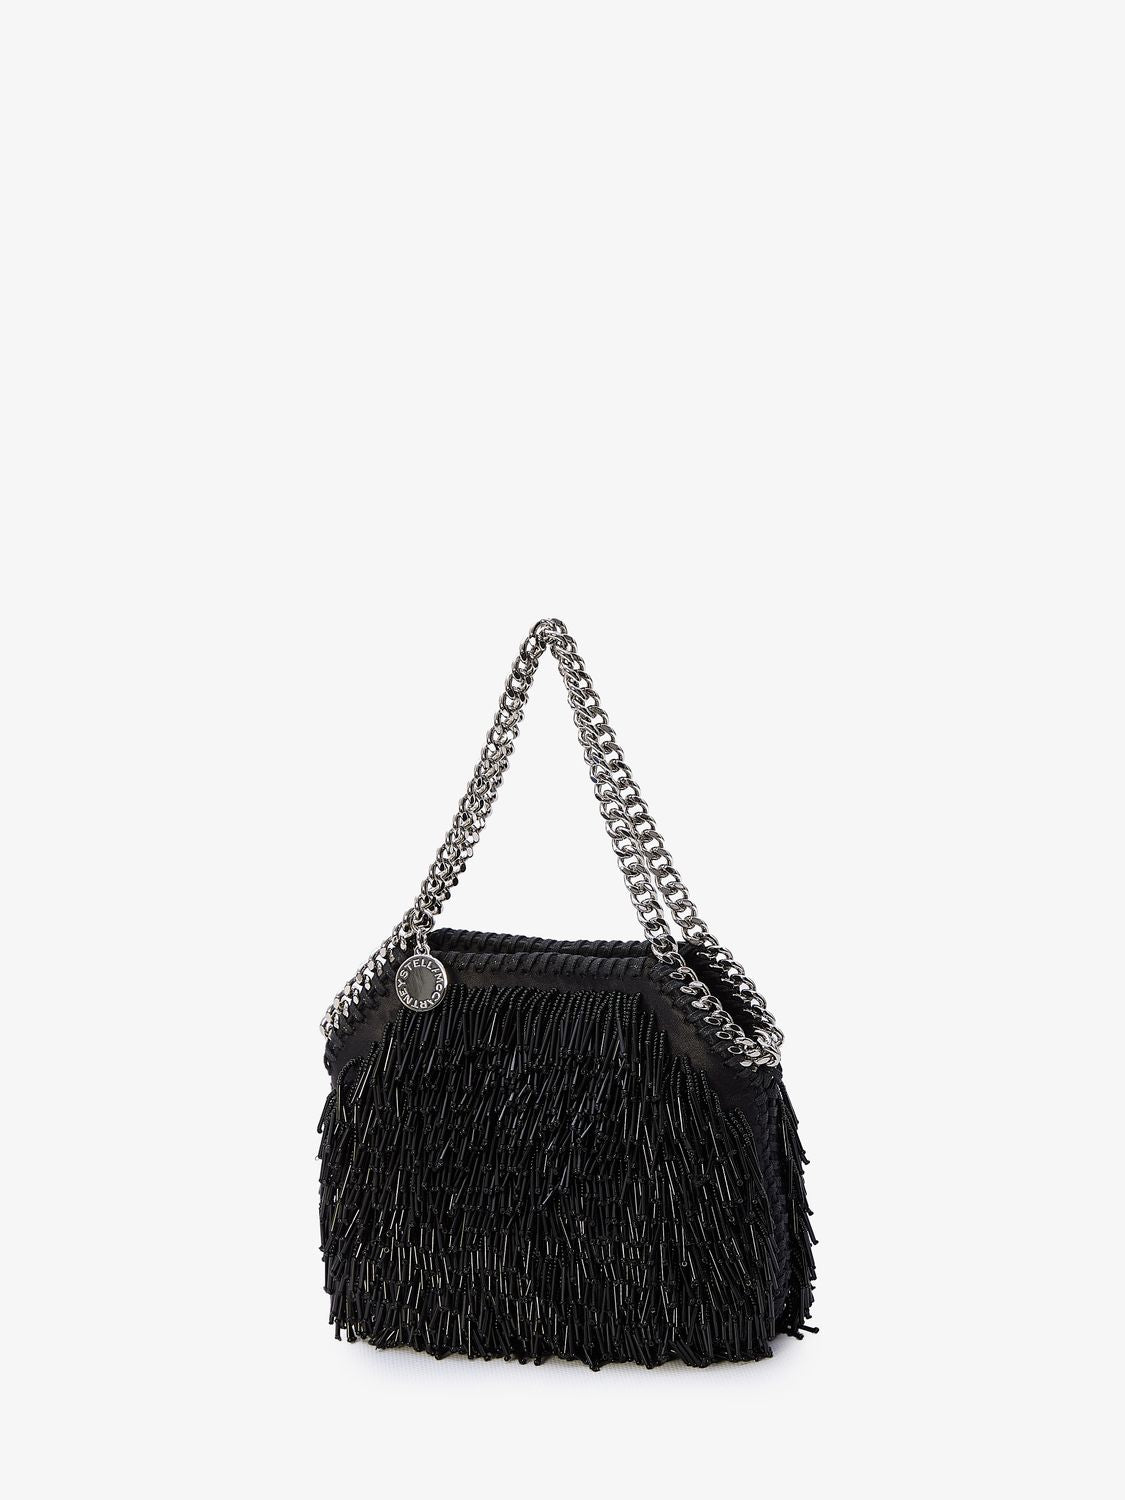 STELLA MCCARTNEY Sequined Micro Tote Bag with Fringe and Silver Chain